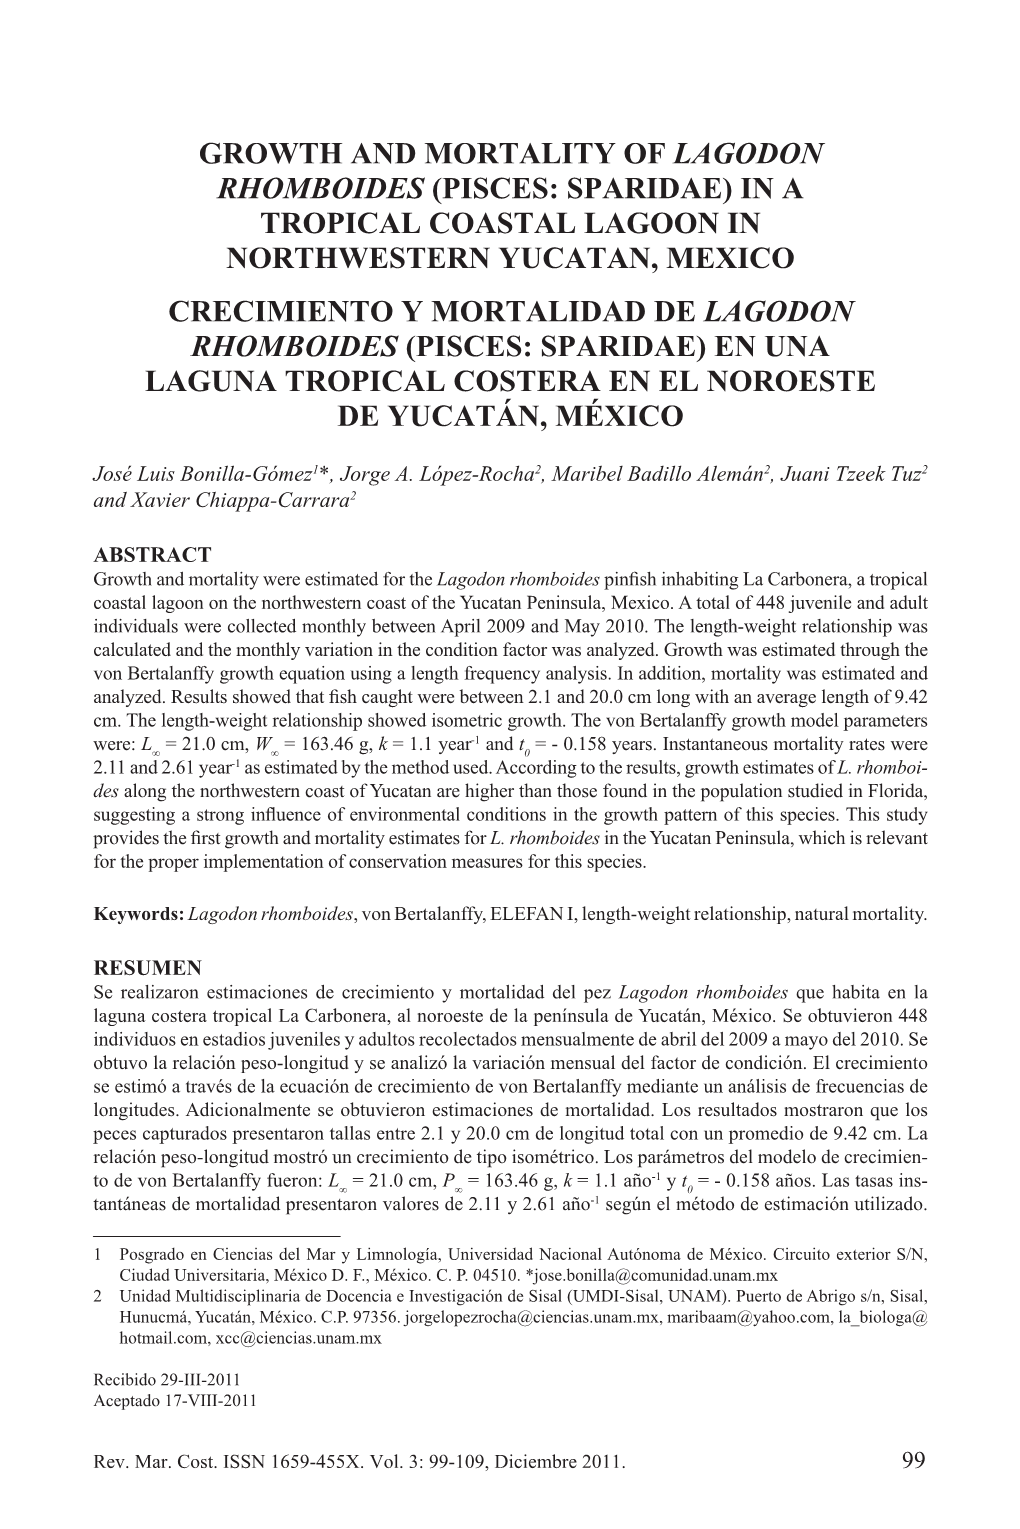 Growth and Mortality of Lagodon Rhomboides (Pisces: Sparidae)